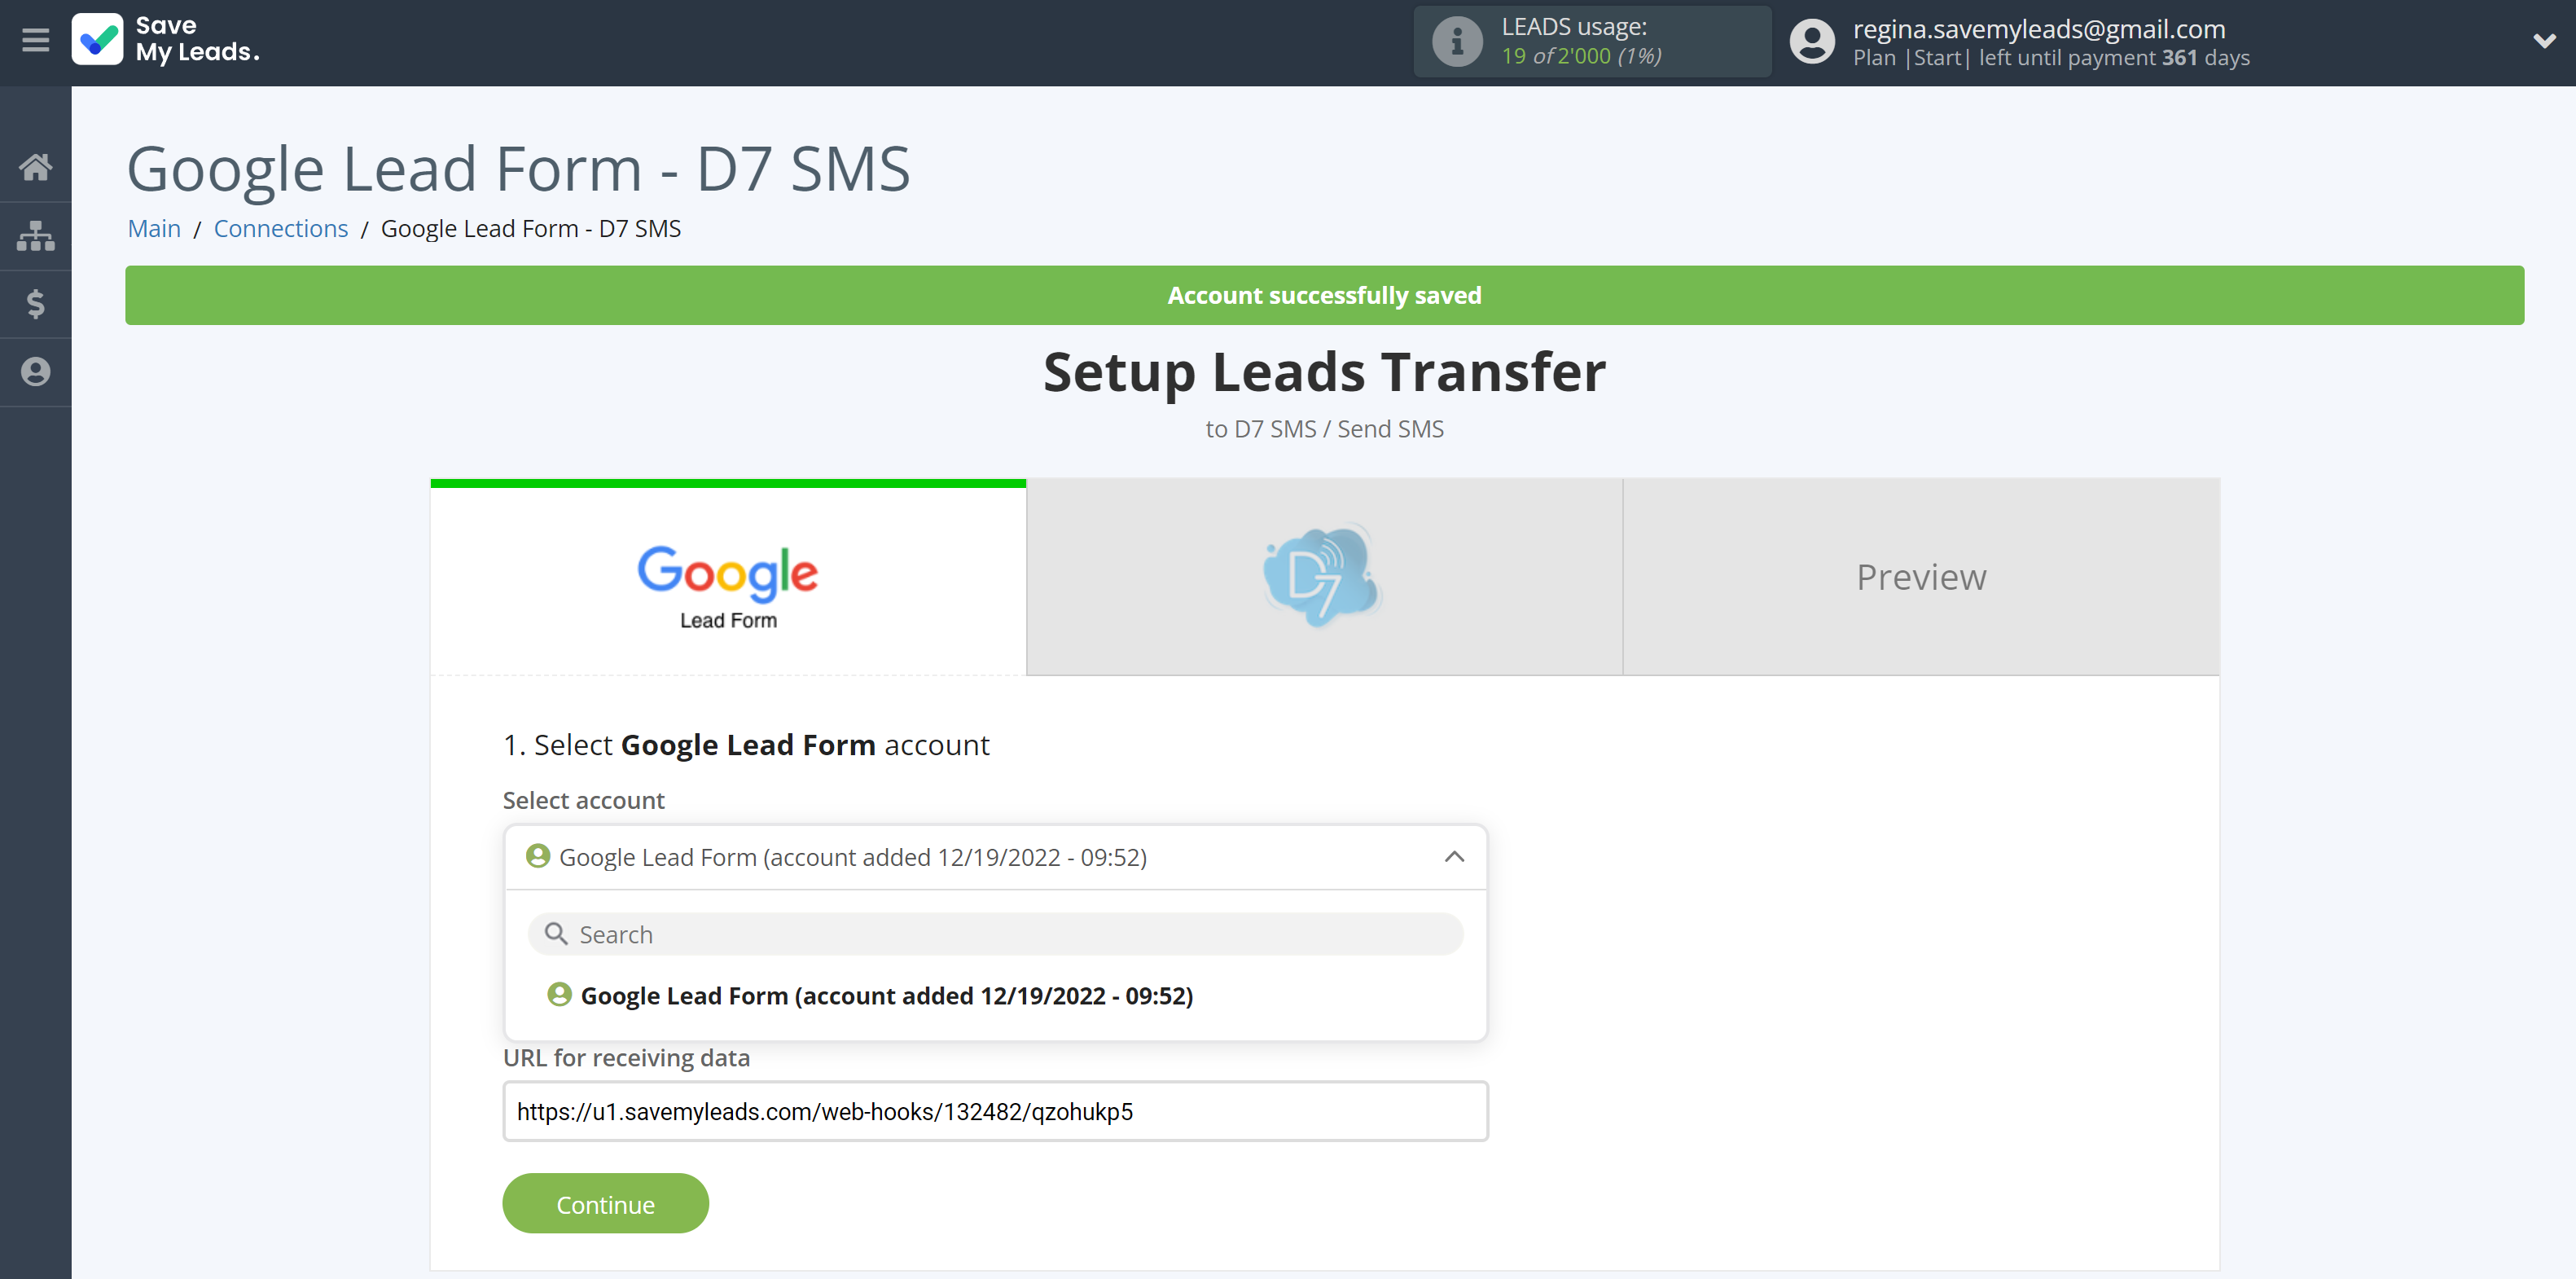 How to Connect Google Lead Form with D7 SMS | Data Source account selection